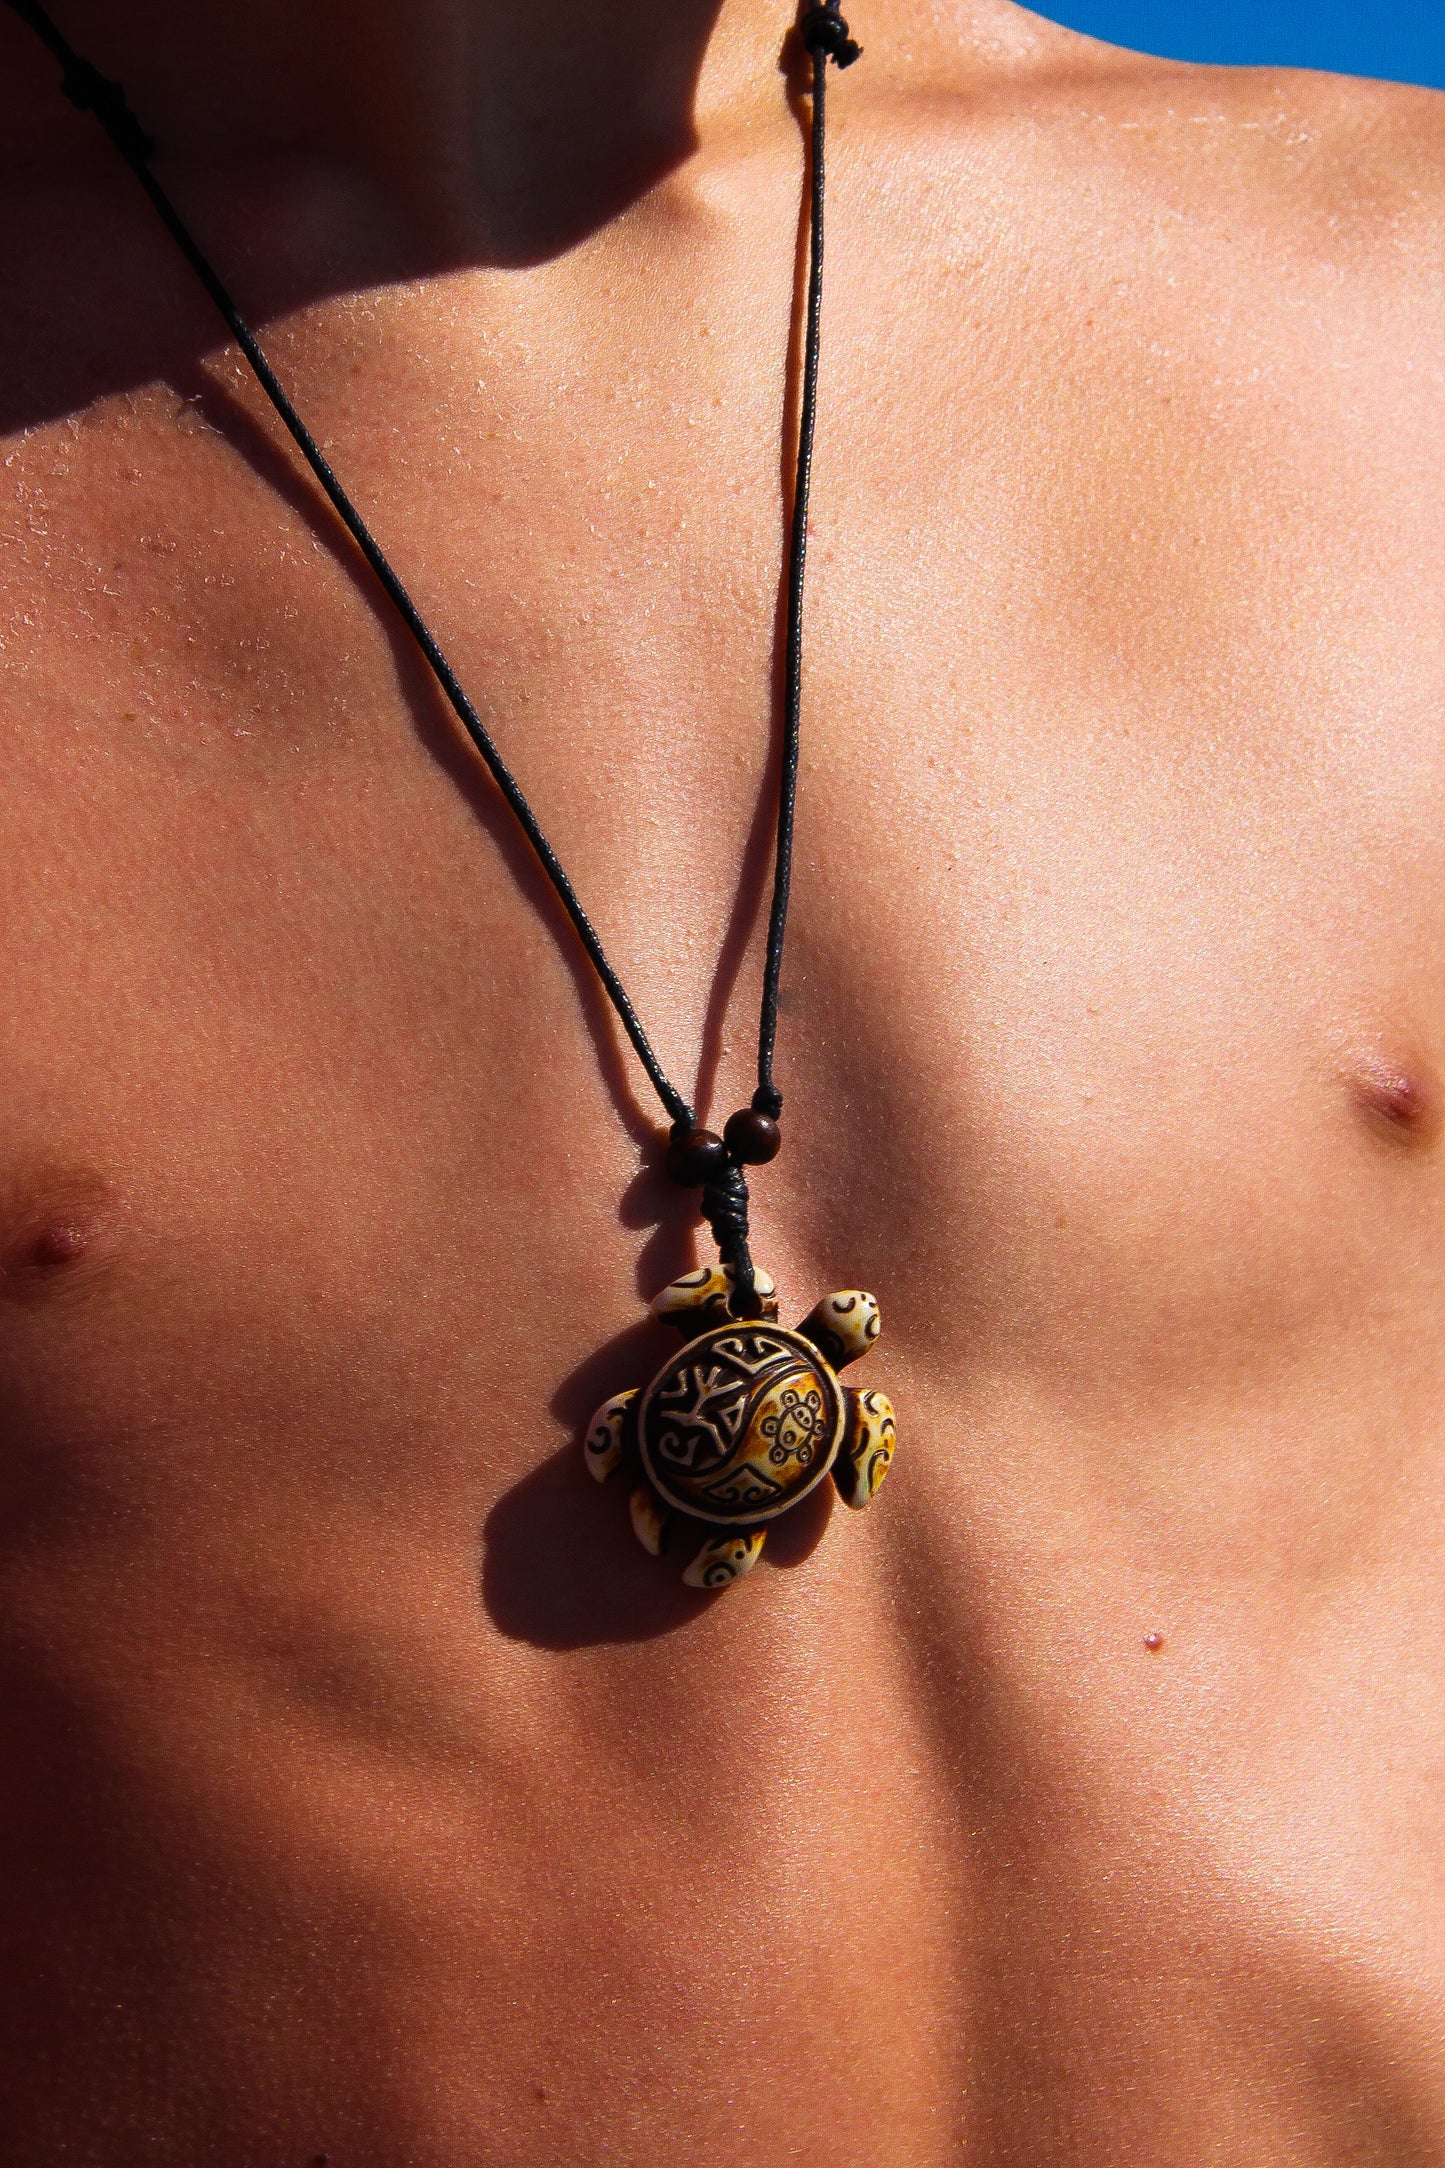 Young man wearing a sea turtle necklace of black cord with a sea turtle pendant